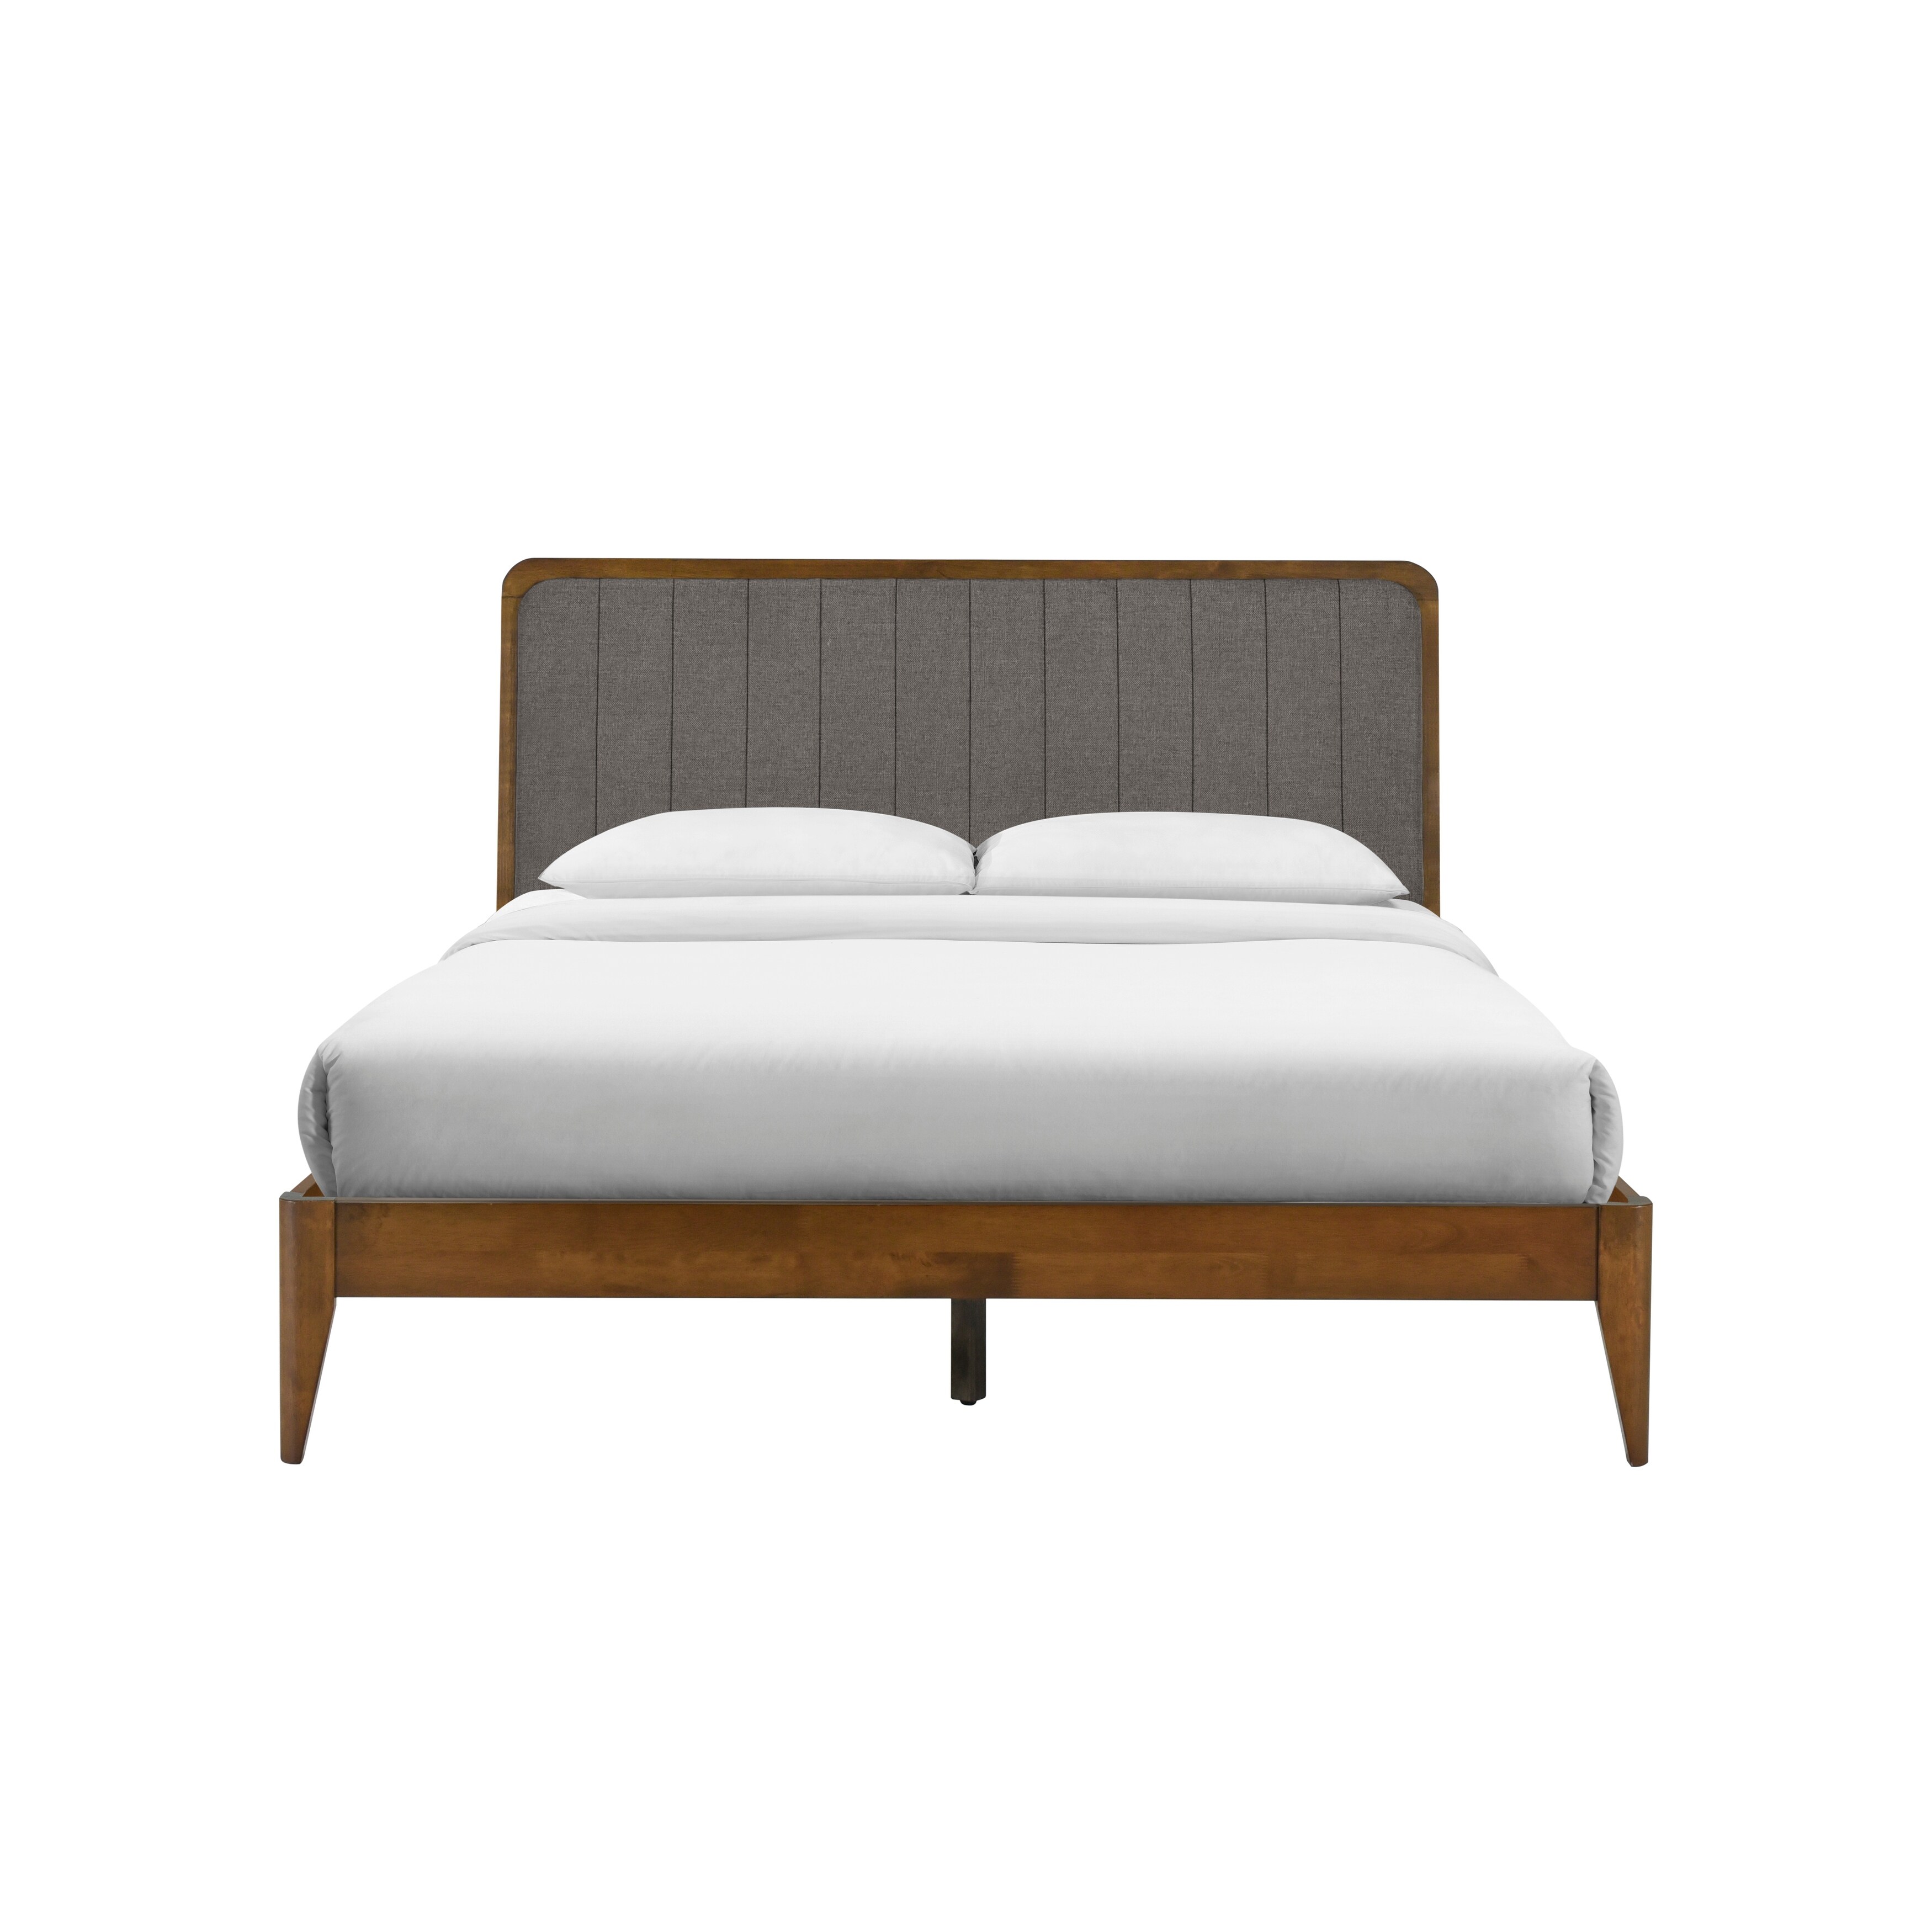 Raven's Point Upholstered Bed